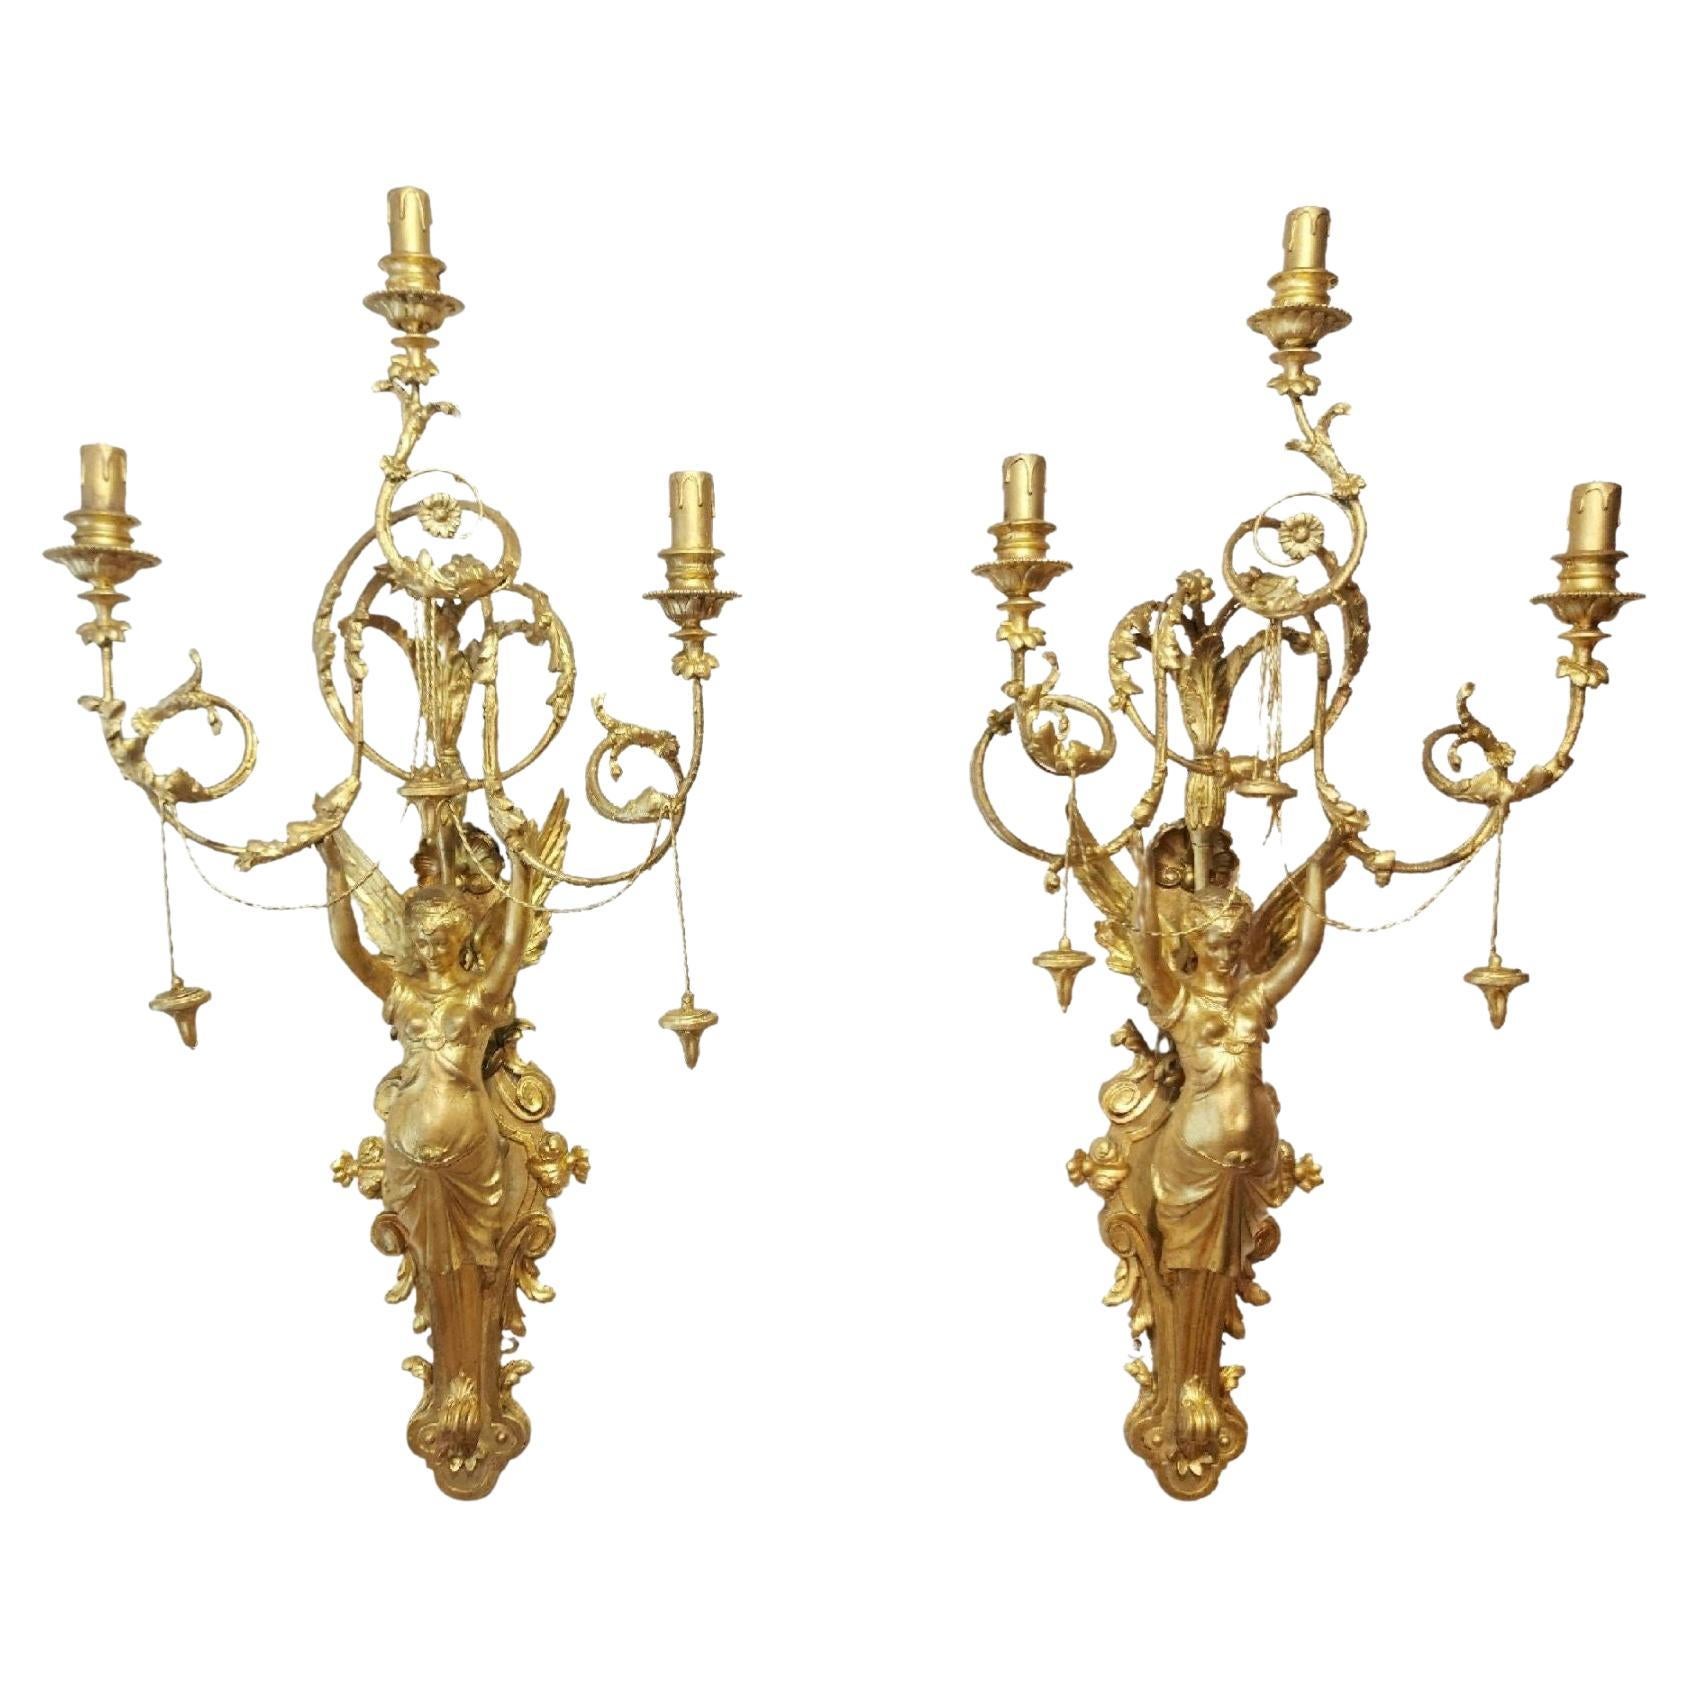 Pair of Italian Neoclassic Empire Gilt Wood Wall Sconces For Sale